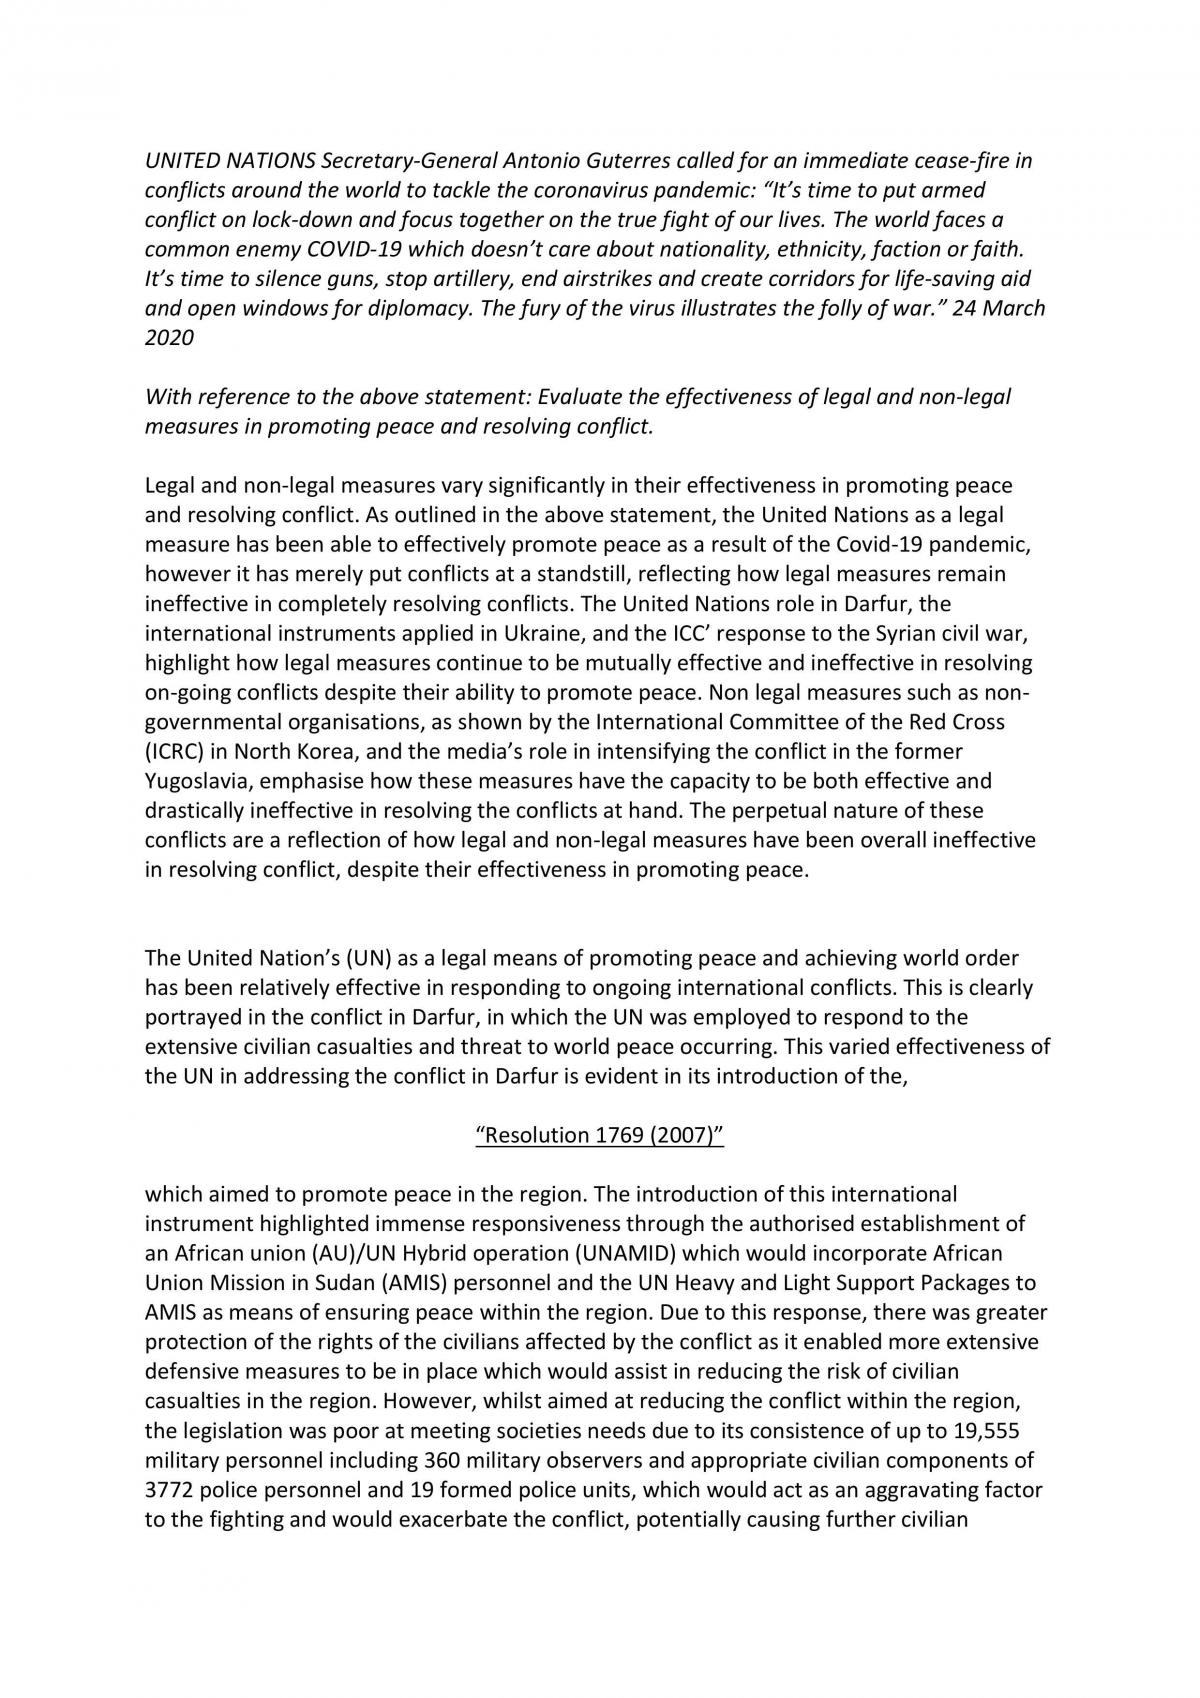 Effectiveness of Legal and Non-Legal Measures World Order - Page 1